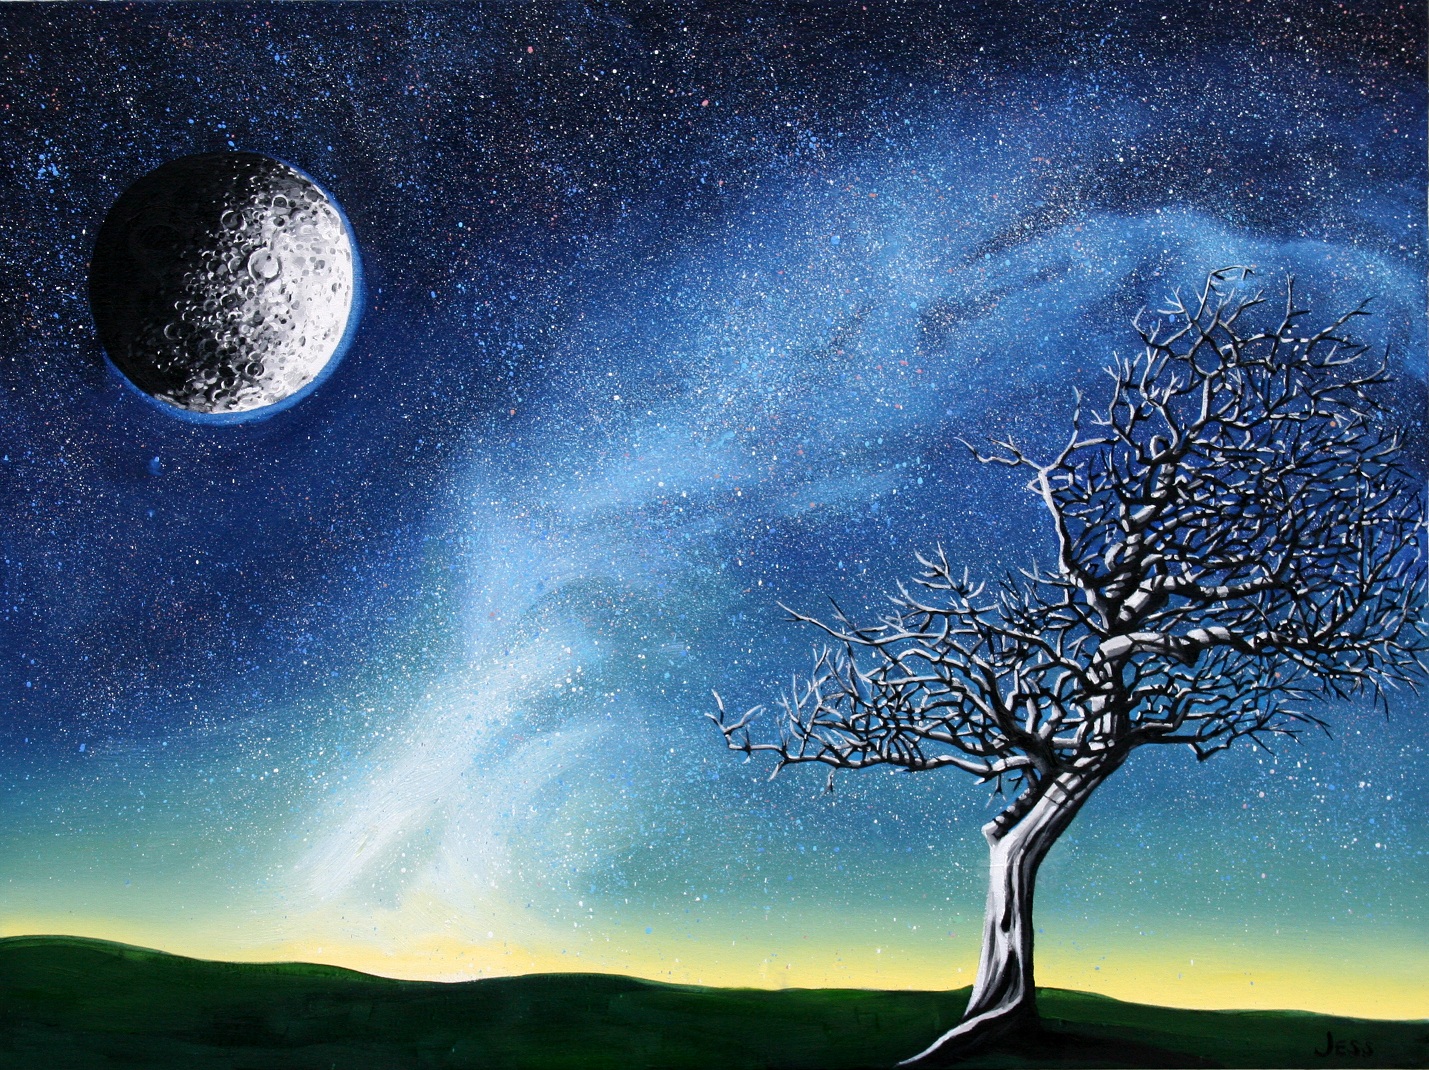 Moonlight and Milkyway, oil on canvas, 36x48 in, Jessica Siemens 2013